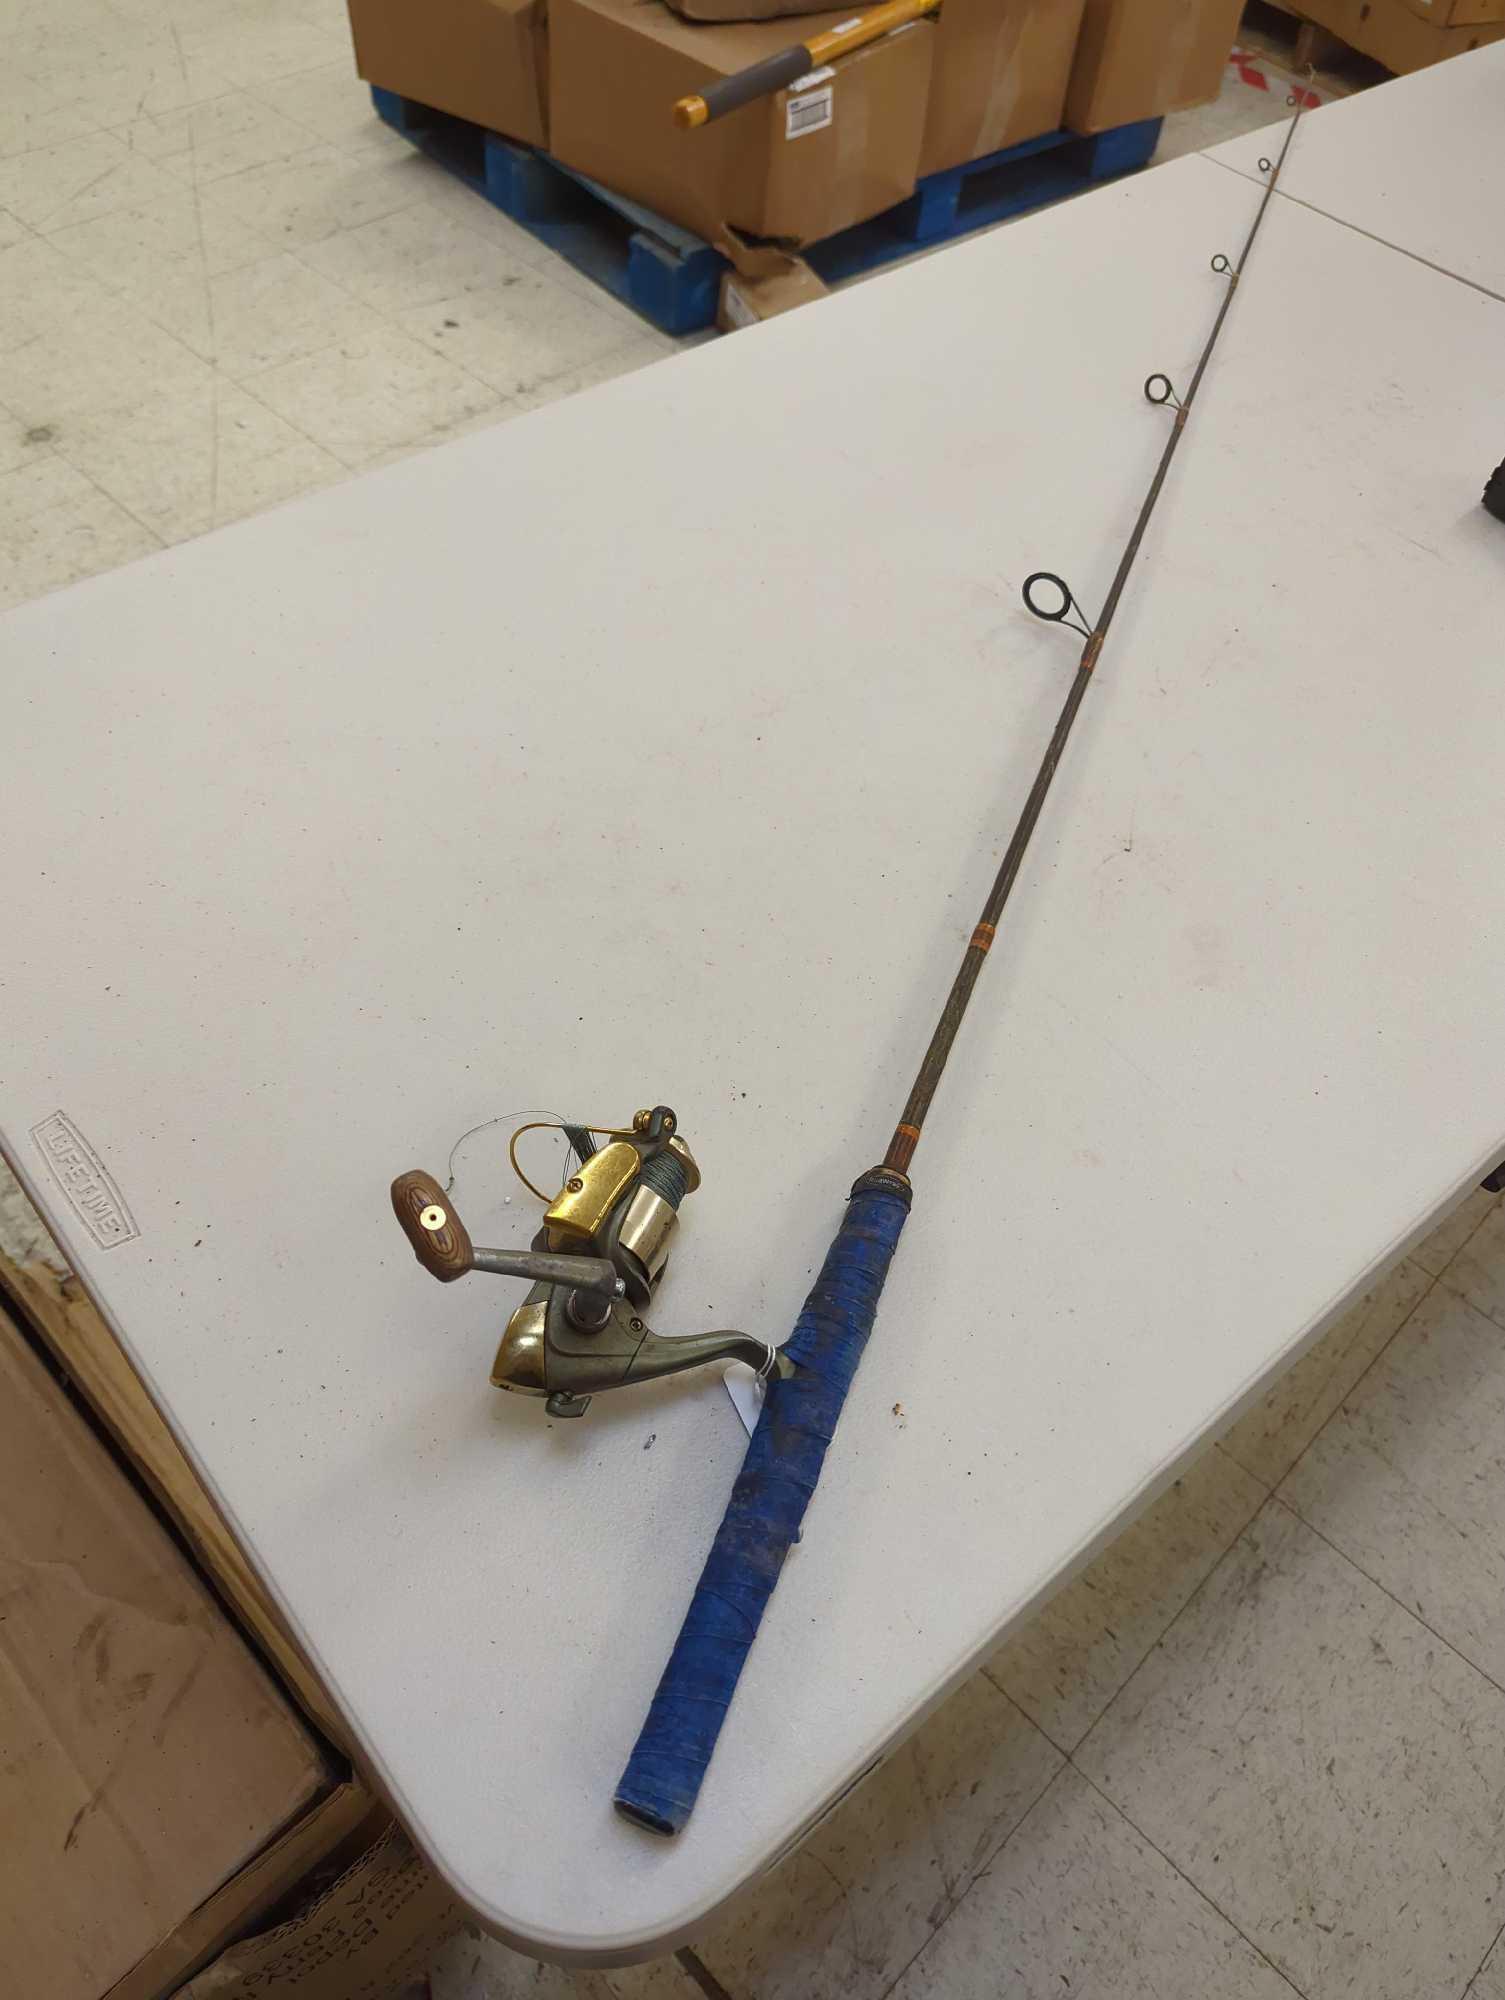 Brown 5'2" fishing rod with spinning reel. Comes as is shown in photos. Appears to be used.